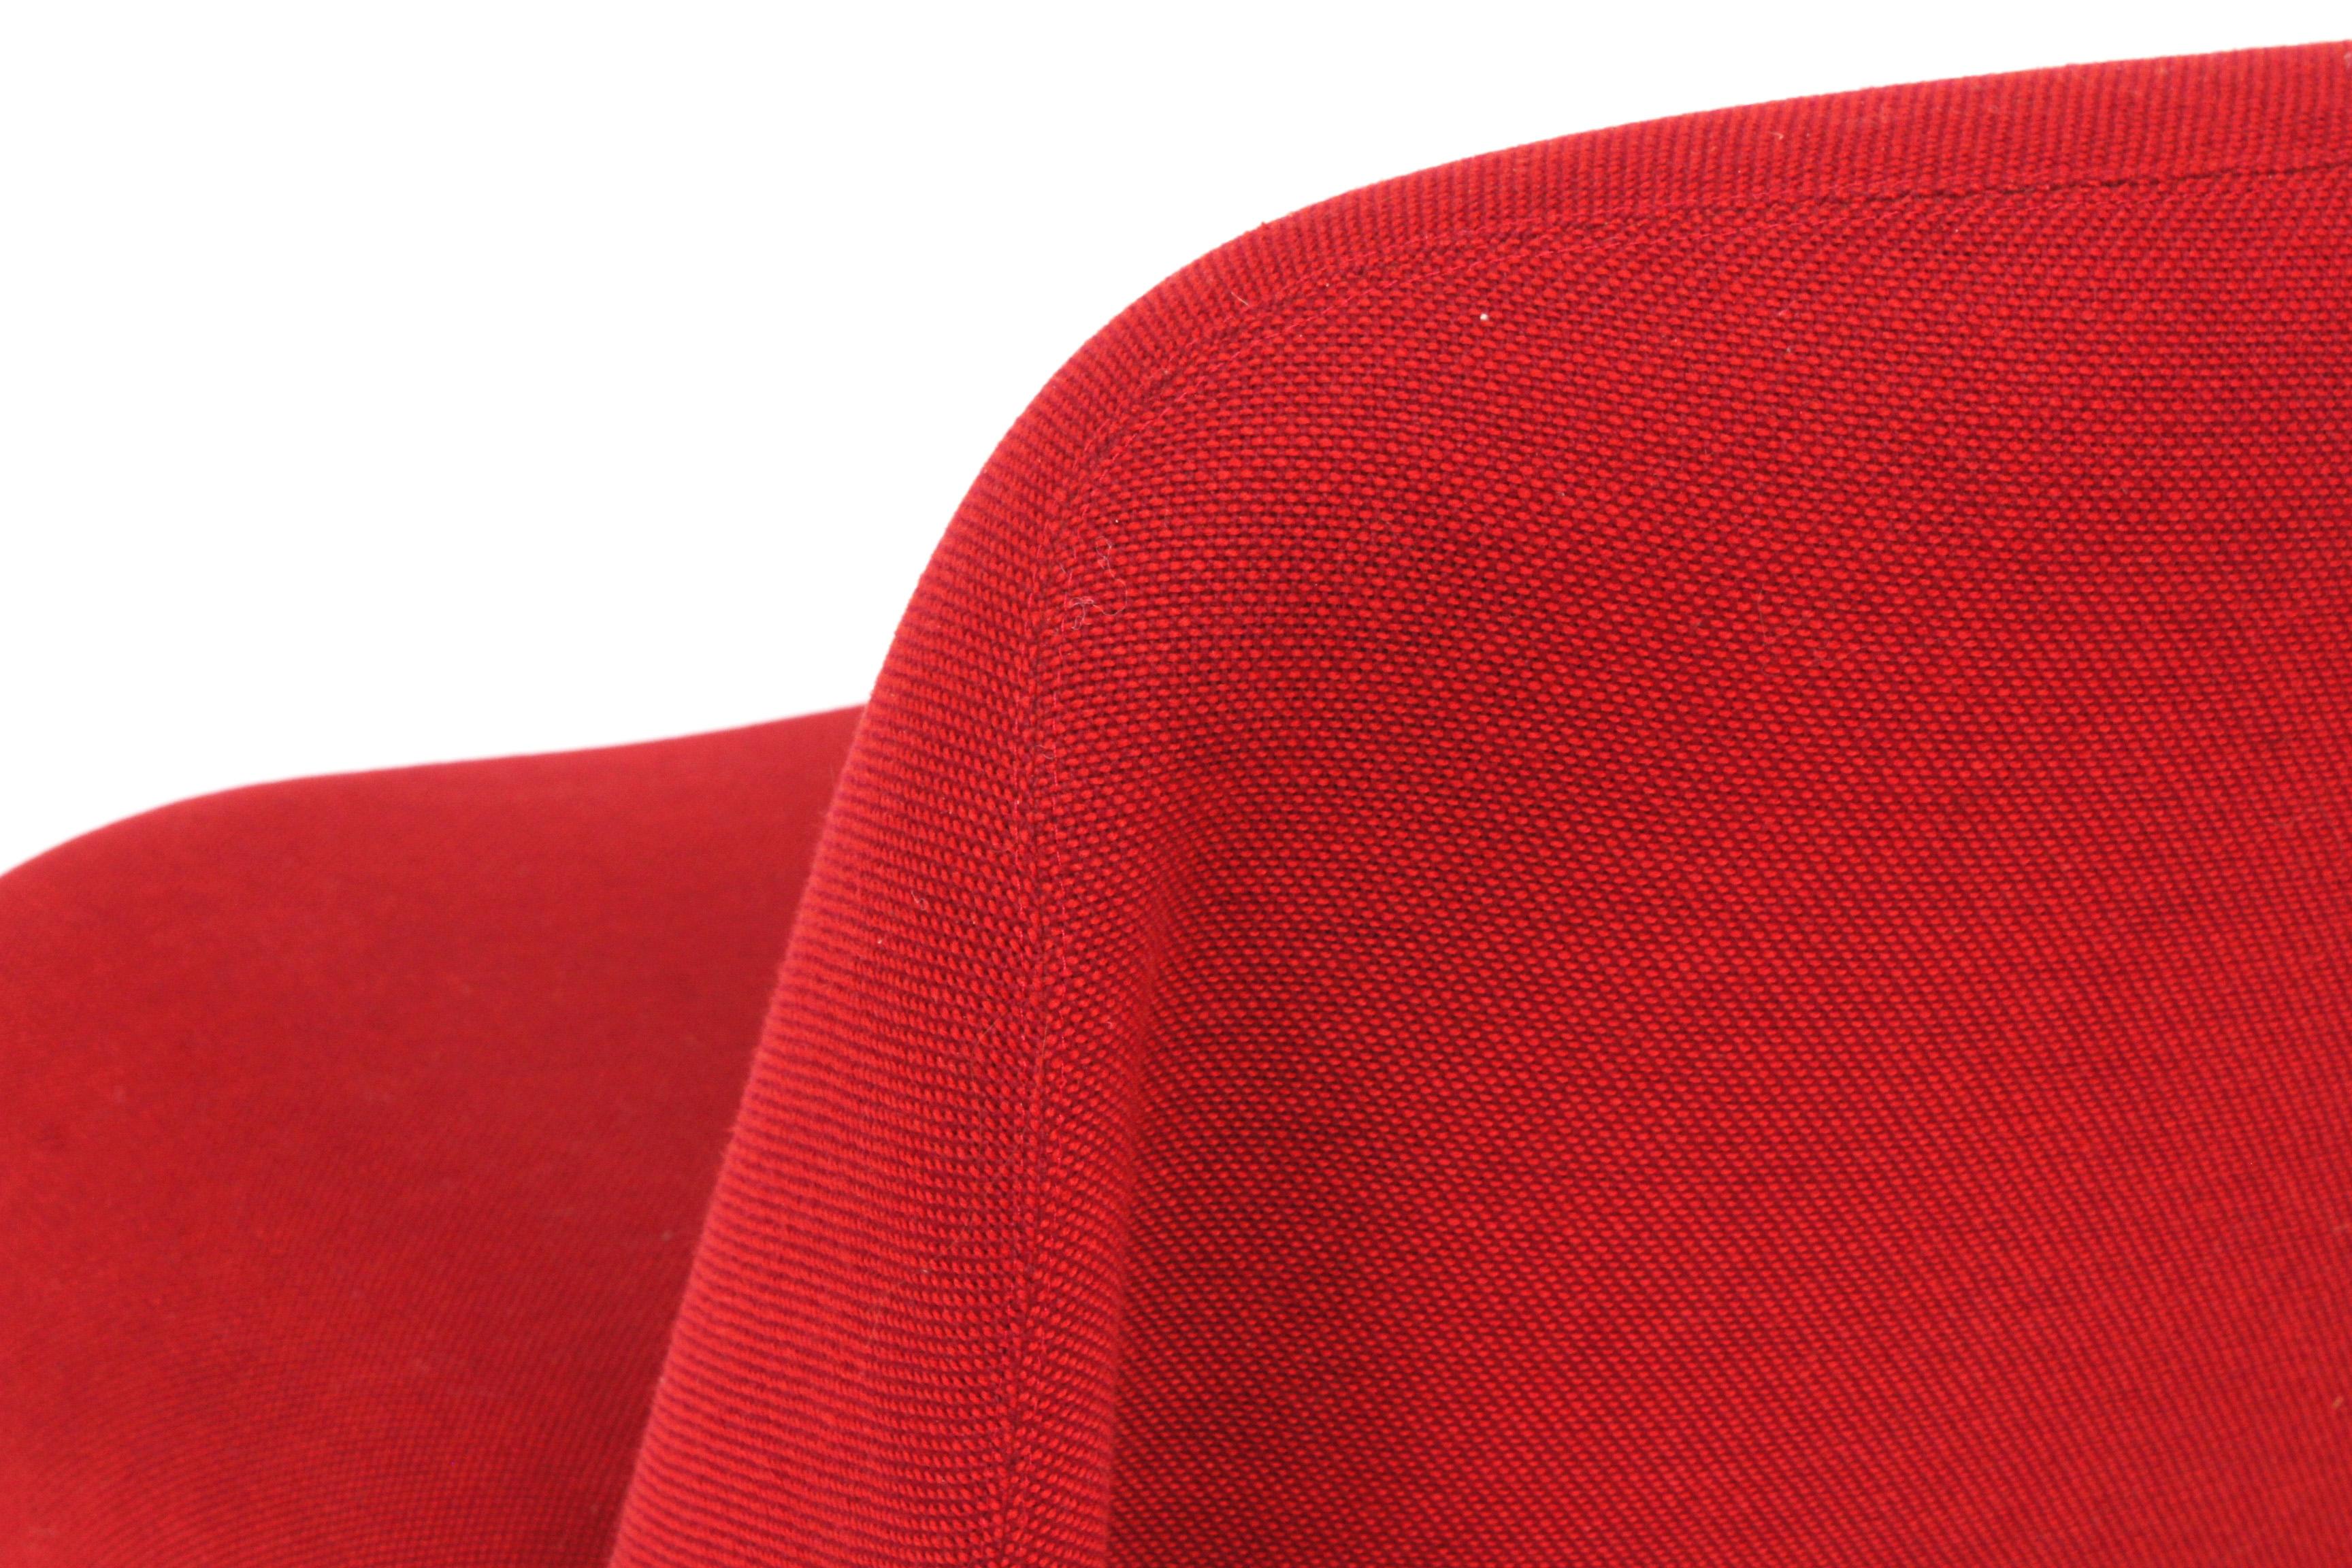 Mid-Century Modern Giancarlo Piretti Alky Lounge Chair in Red / Magenta Fabric for Anonima Castelli